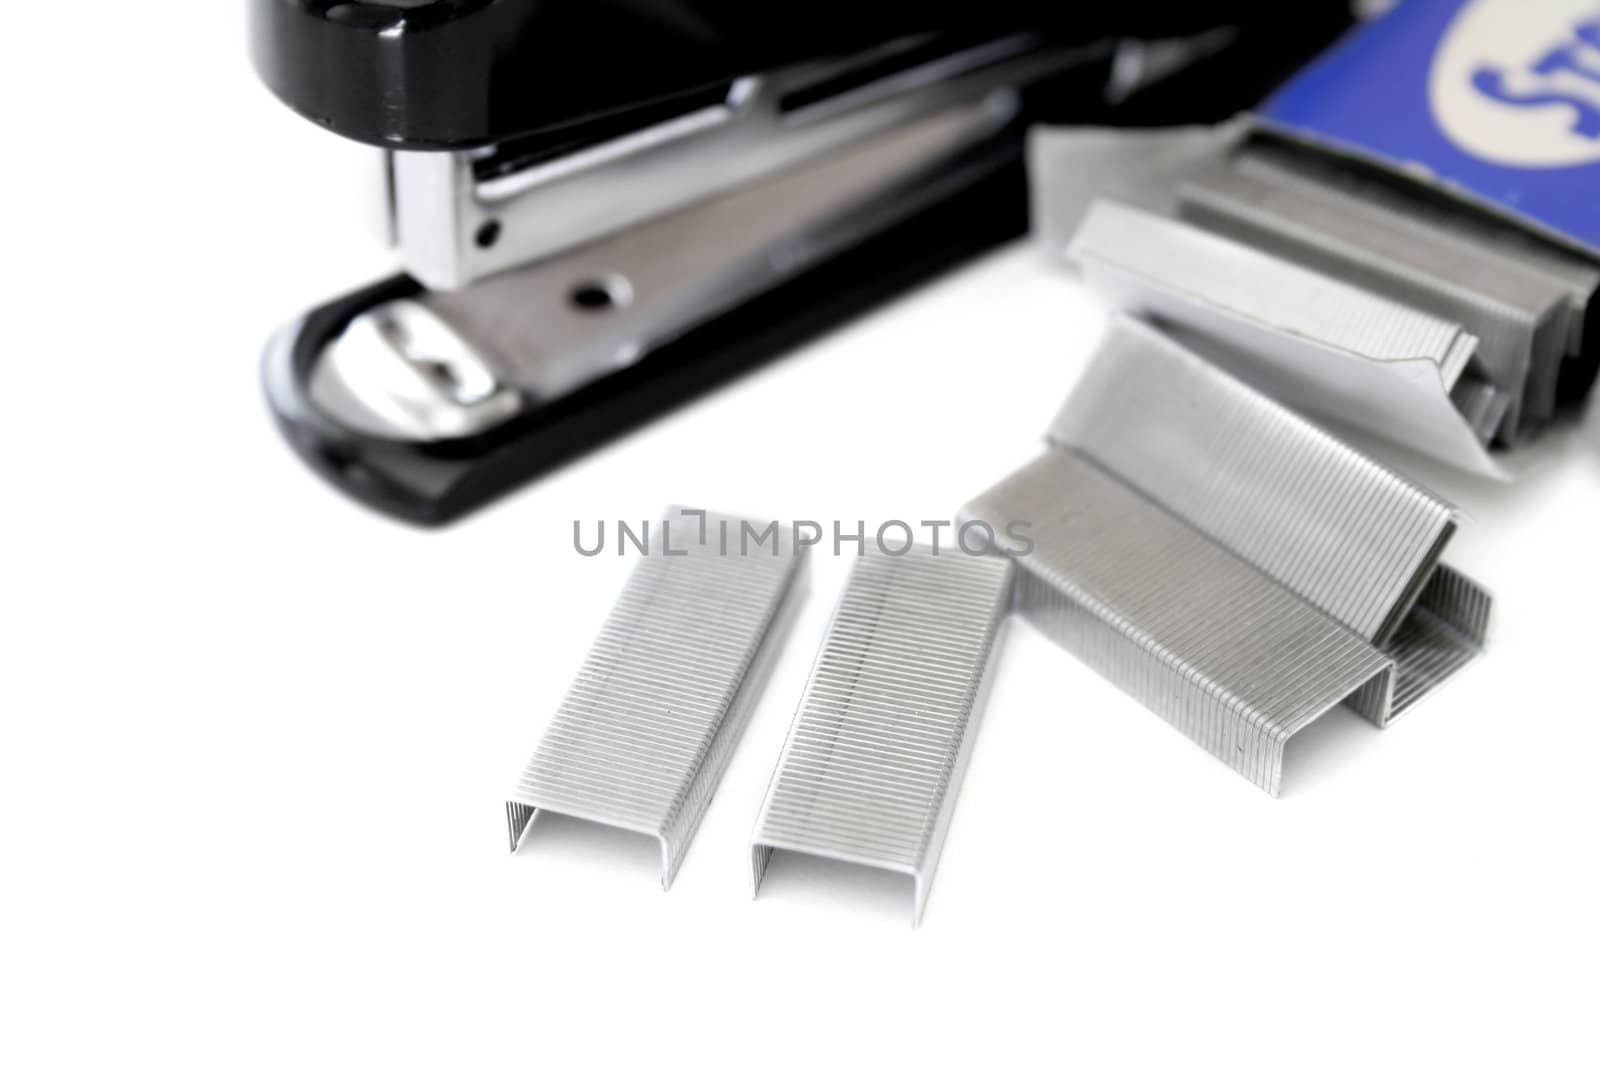 Staples and stapler isolated on a white background with a shallow DOF.